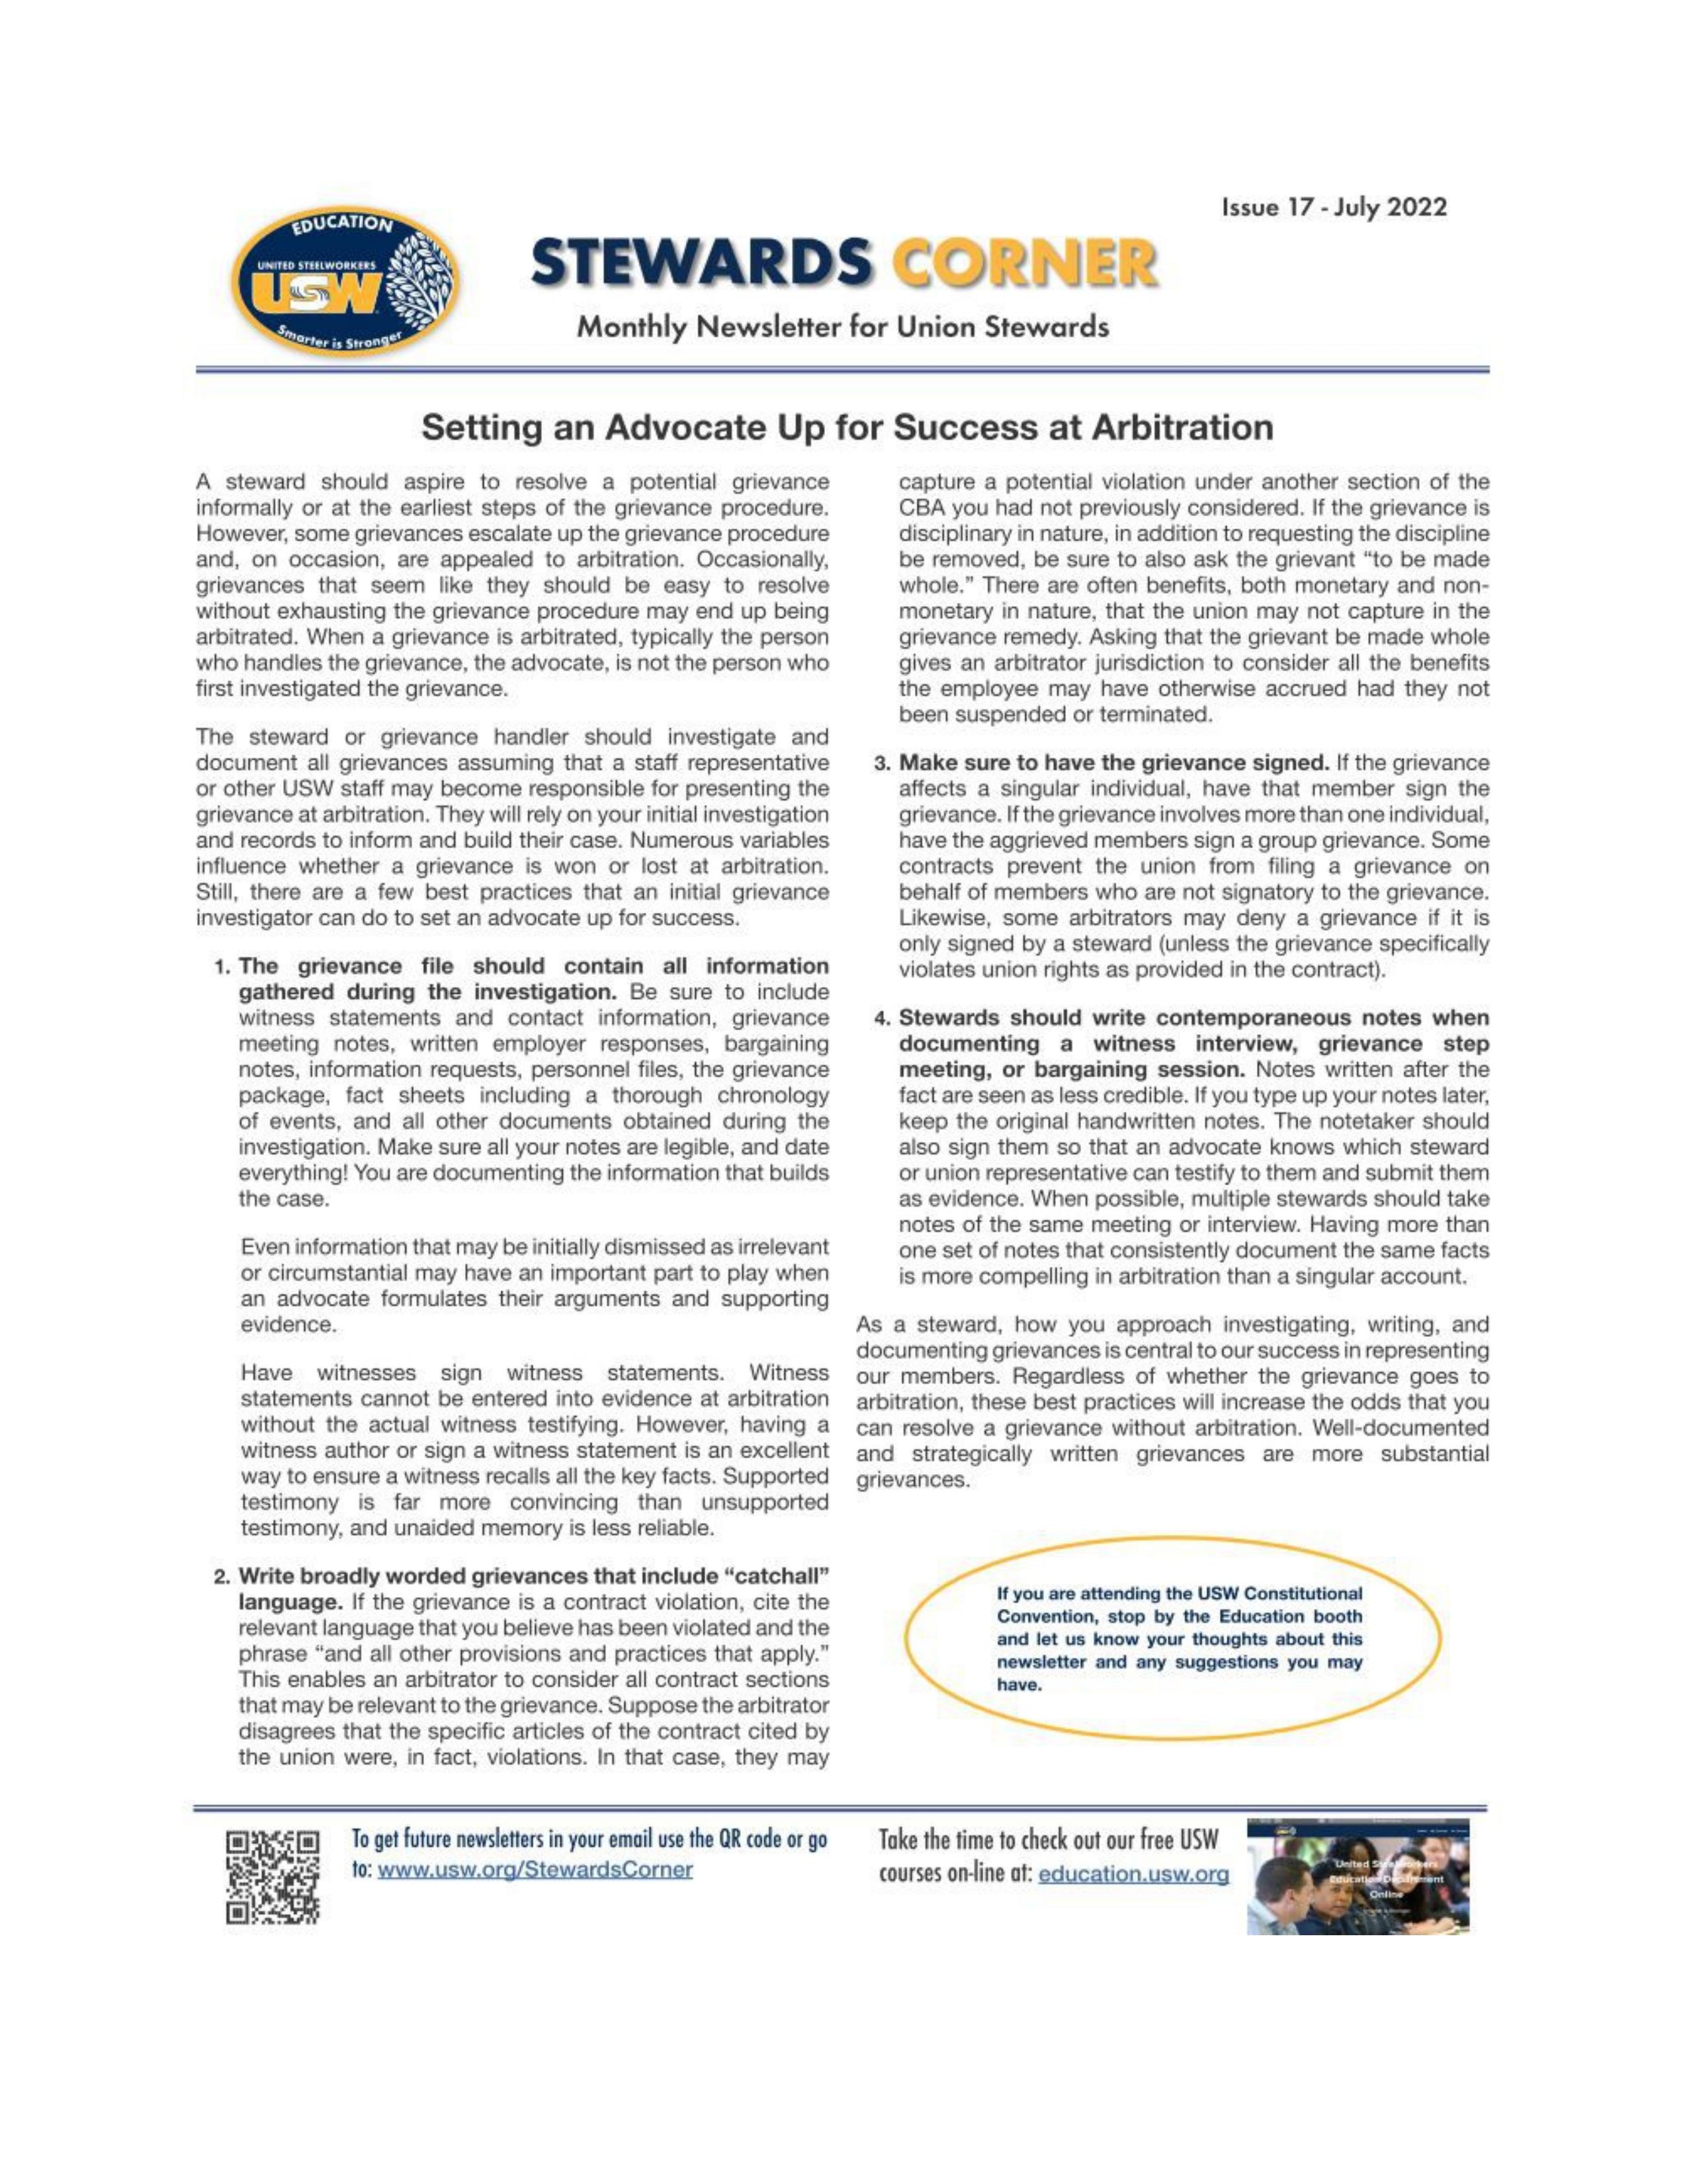 Focus on Steelworkers: Preparing For Arbitration